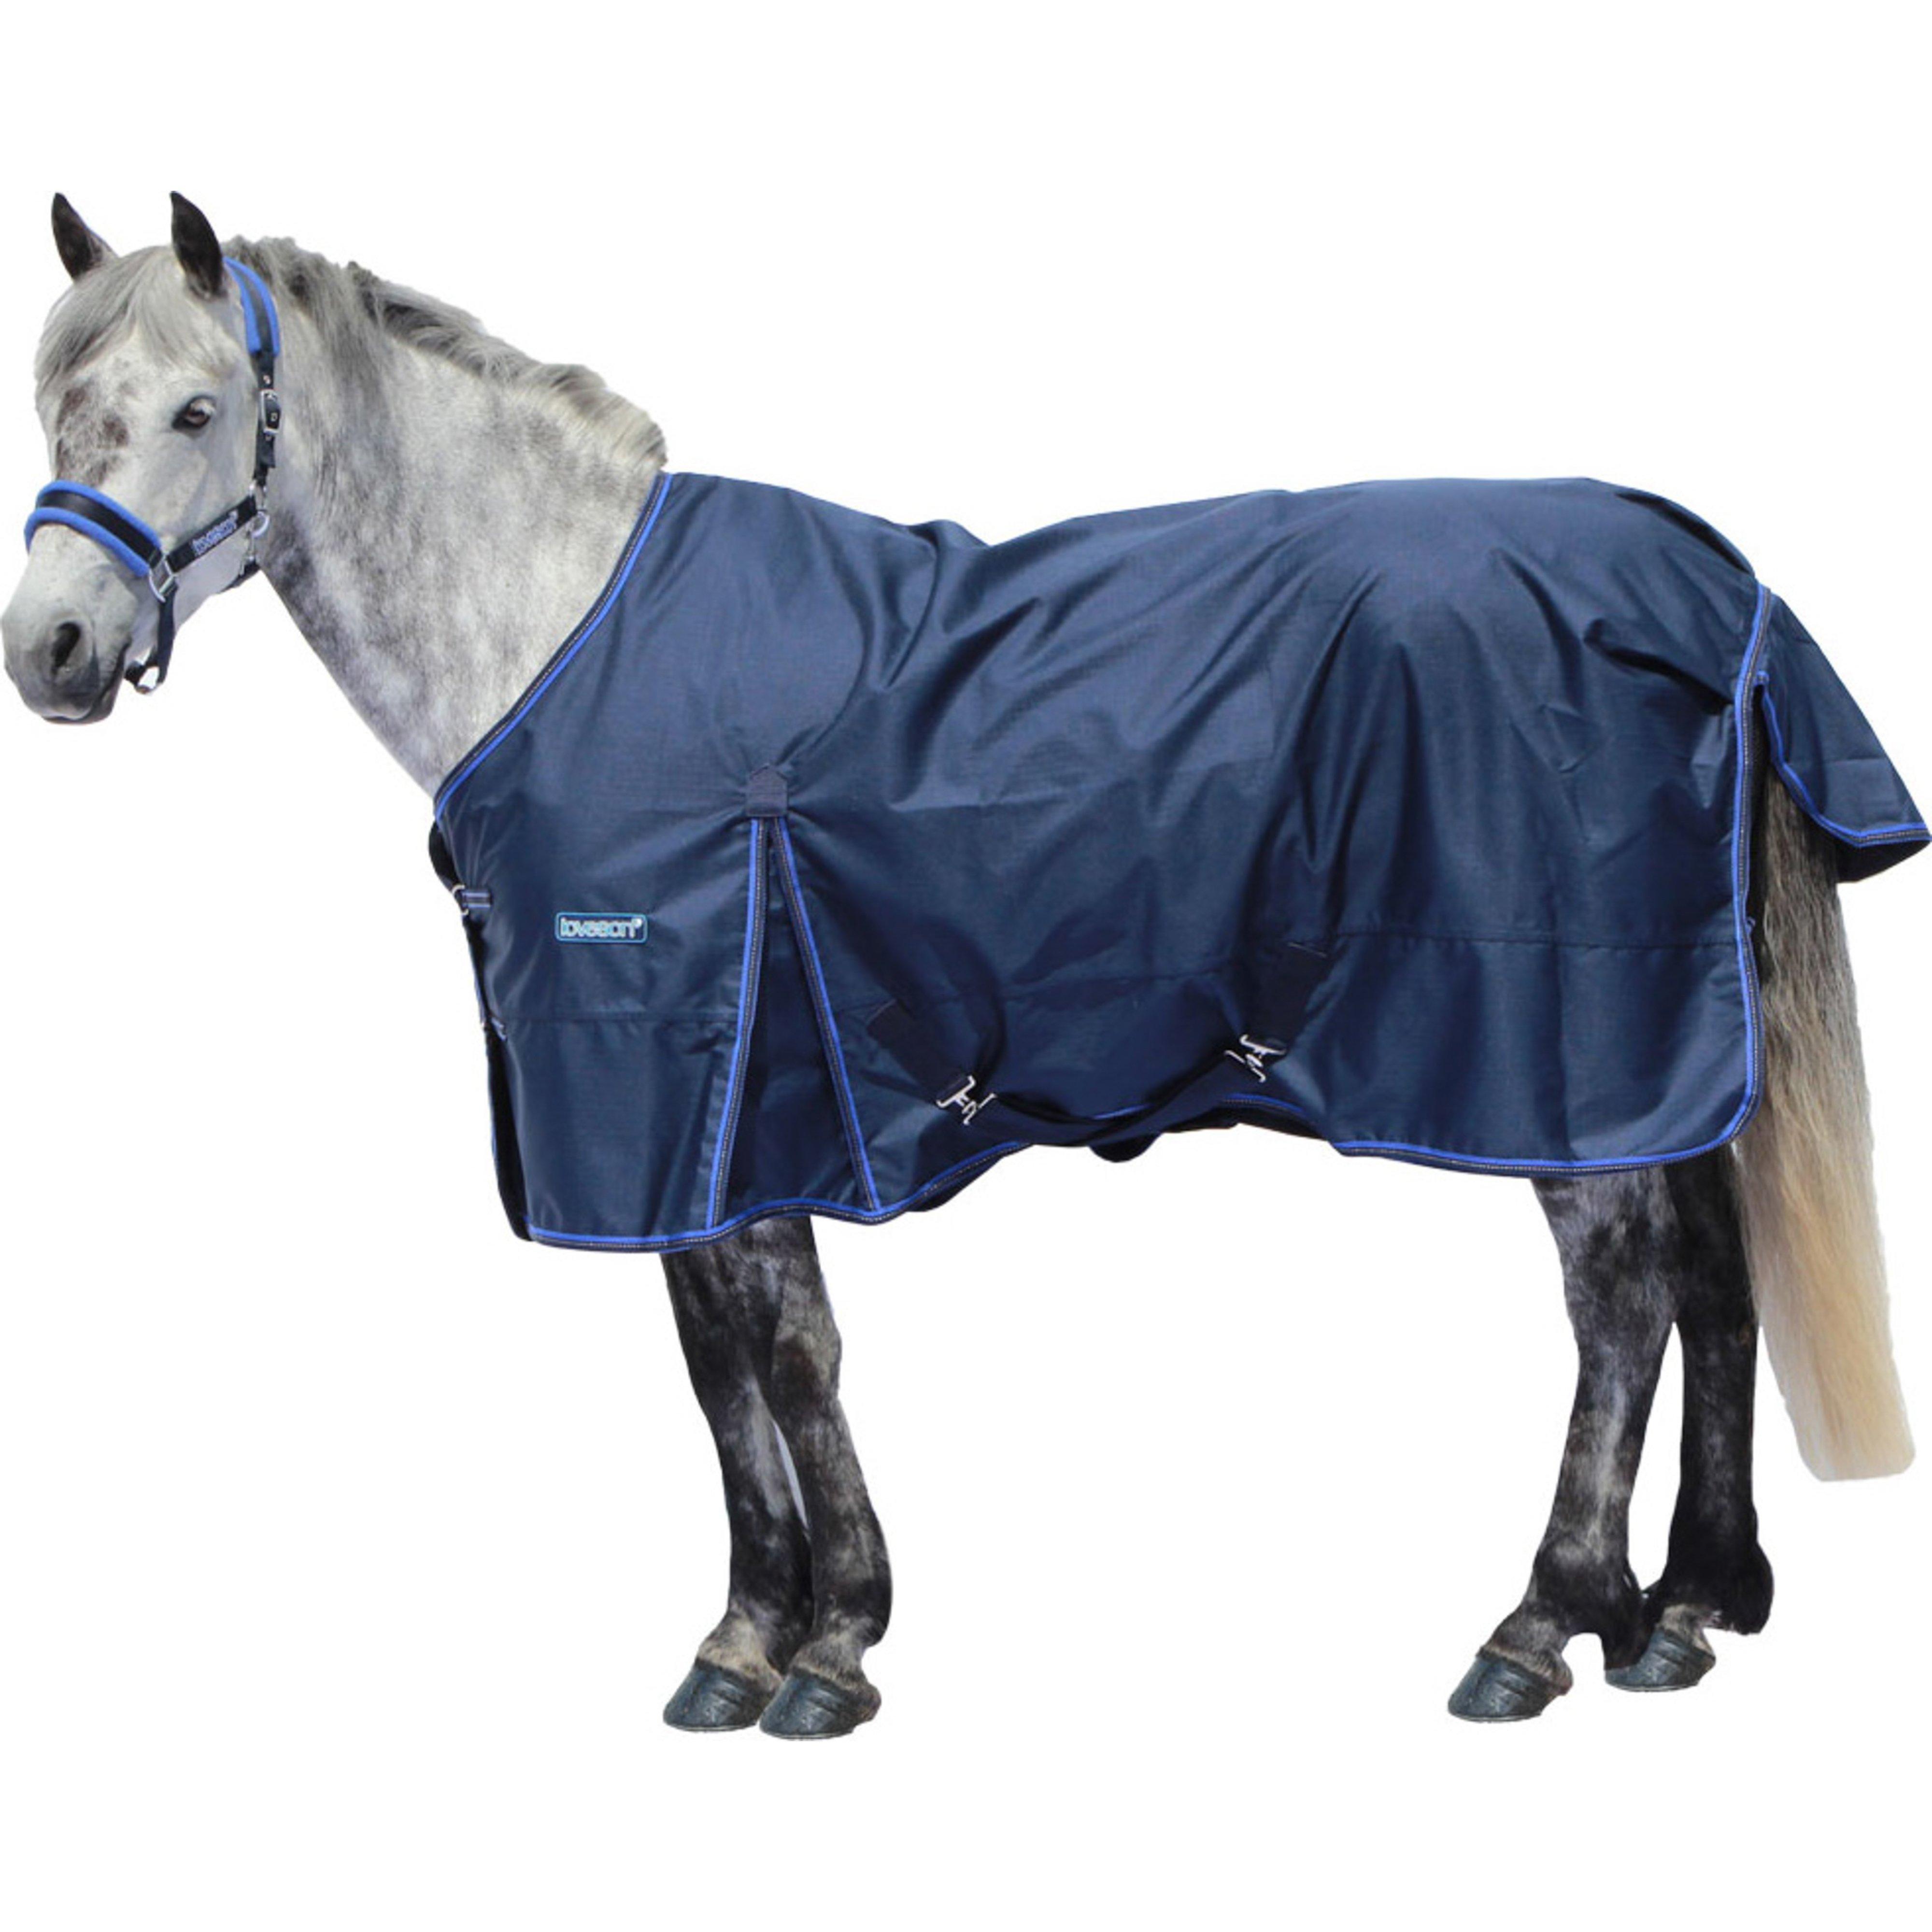 Loveson Turnout 0g Rug Review